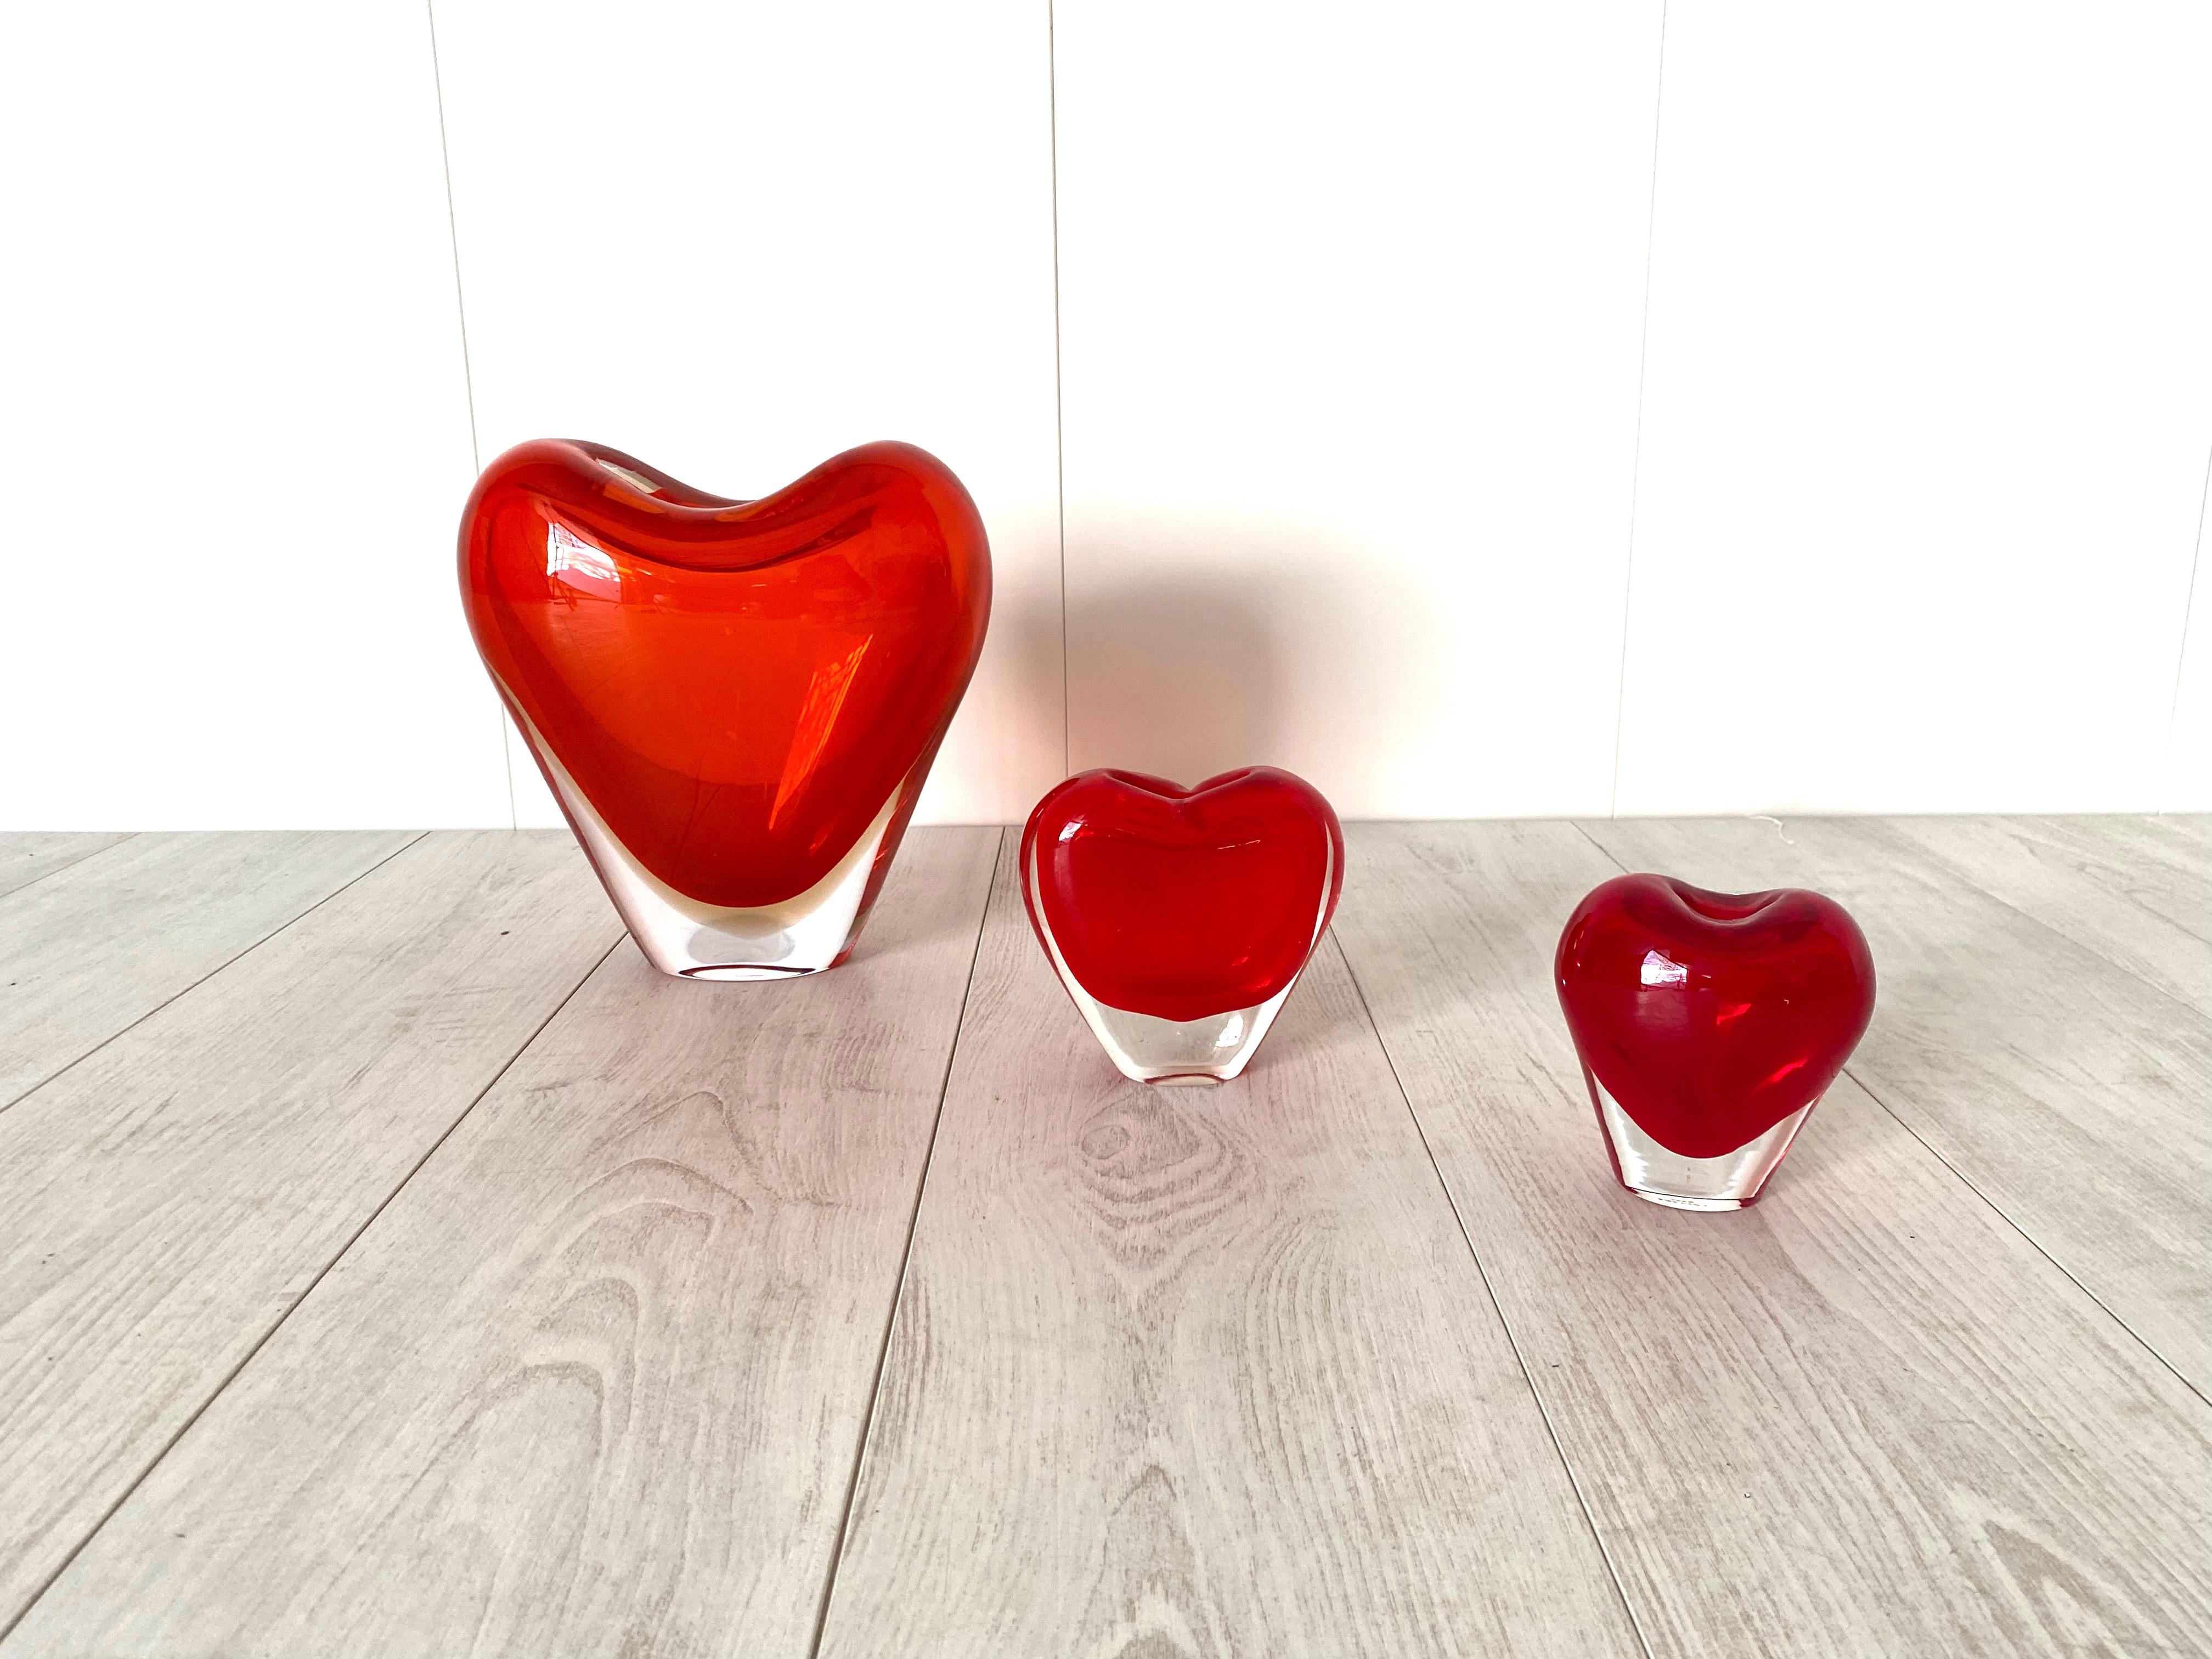 Cuore & Cuoricino Heart Vases by Maria Christina Hamel for Salviati, 1990s For Sale 3